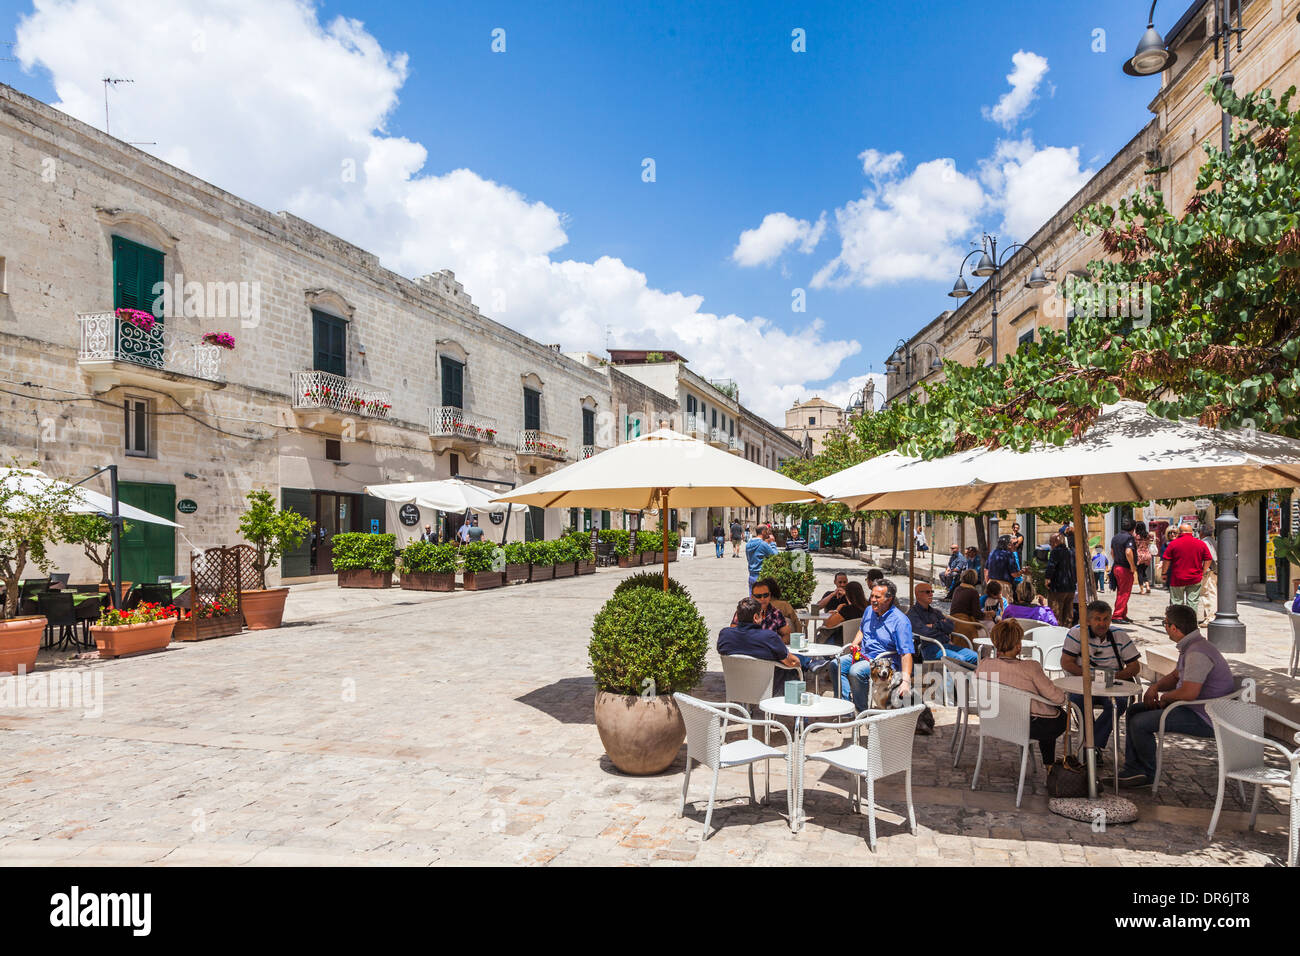 Tourists enjoying pavement cafes under umbrellas in Via D. Pascoli, Matera, Basilicata, southern Italy on a sunny summer day under a blue sky Stock Photo